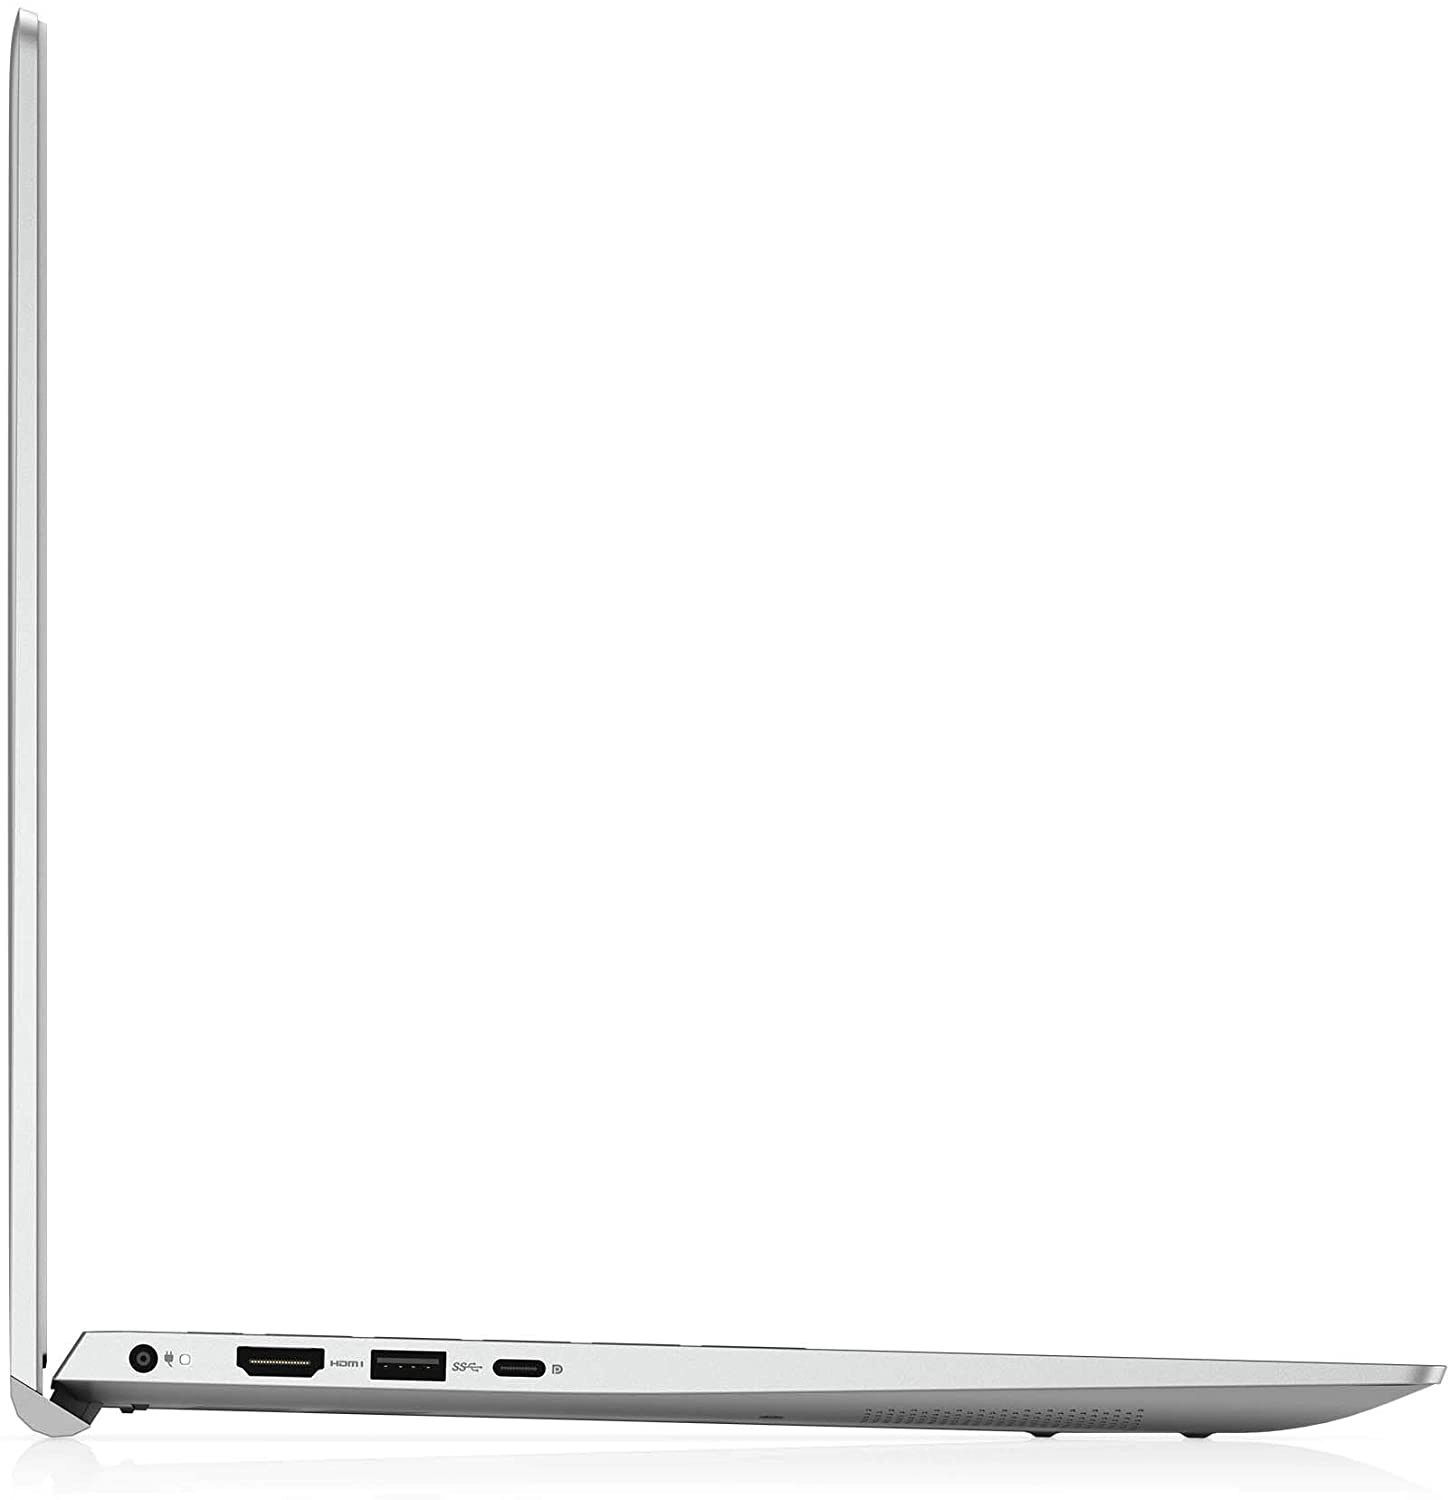 Dell Inspiron 15 5502 laptop image